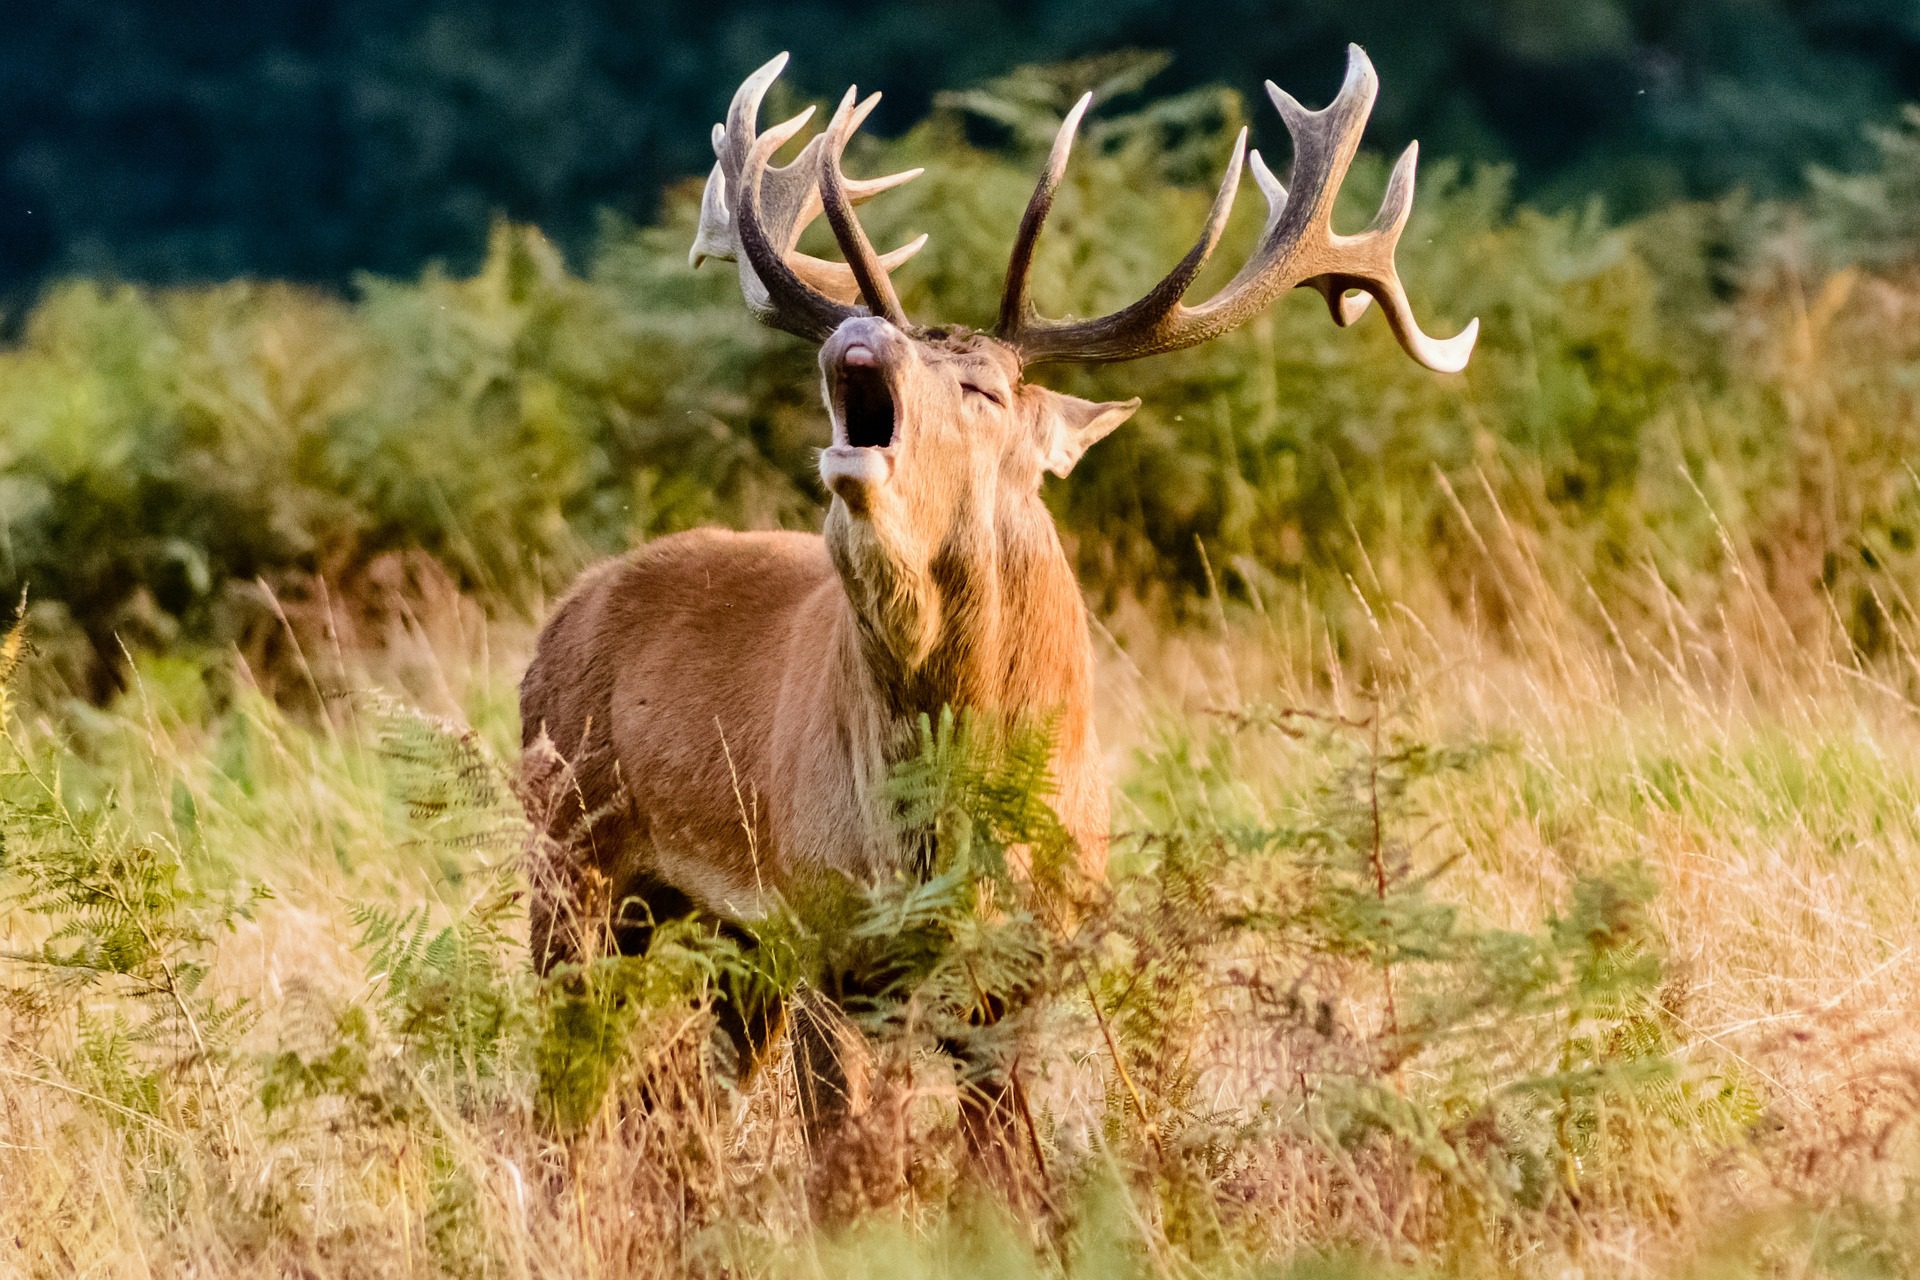 The red stag roar is a magical time.